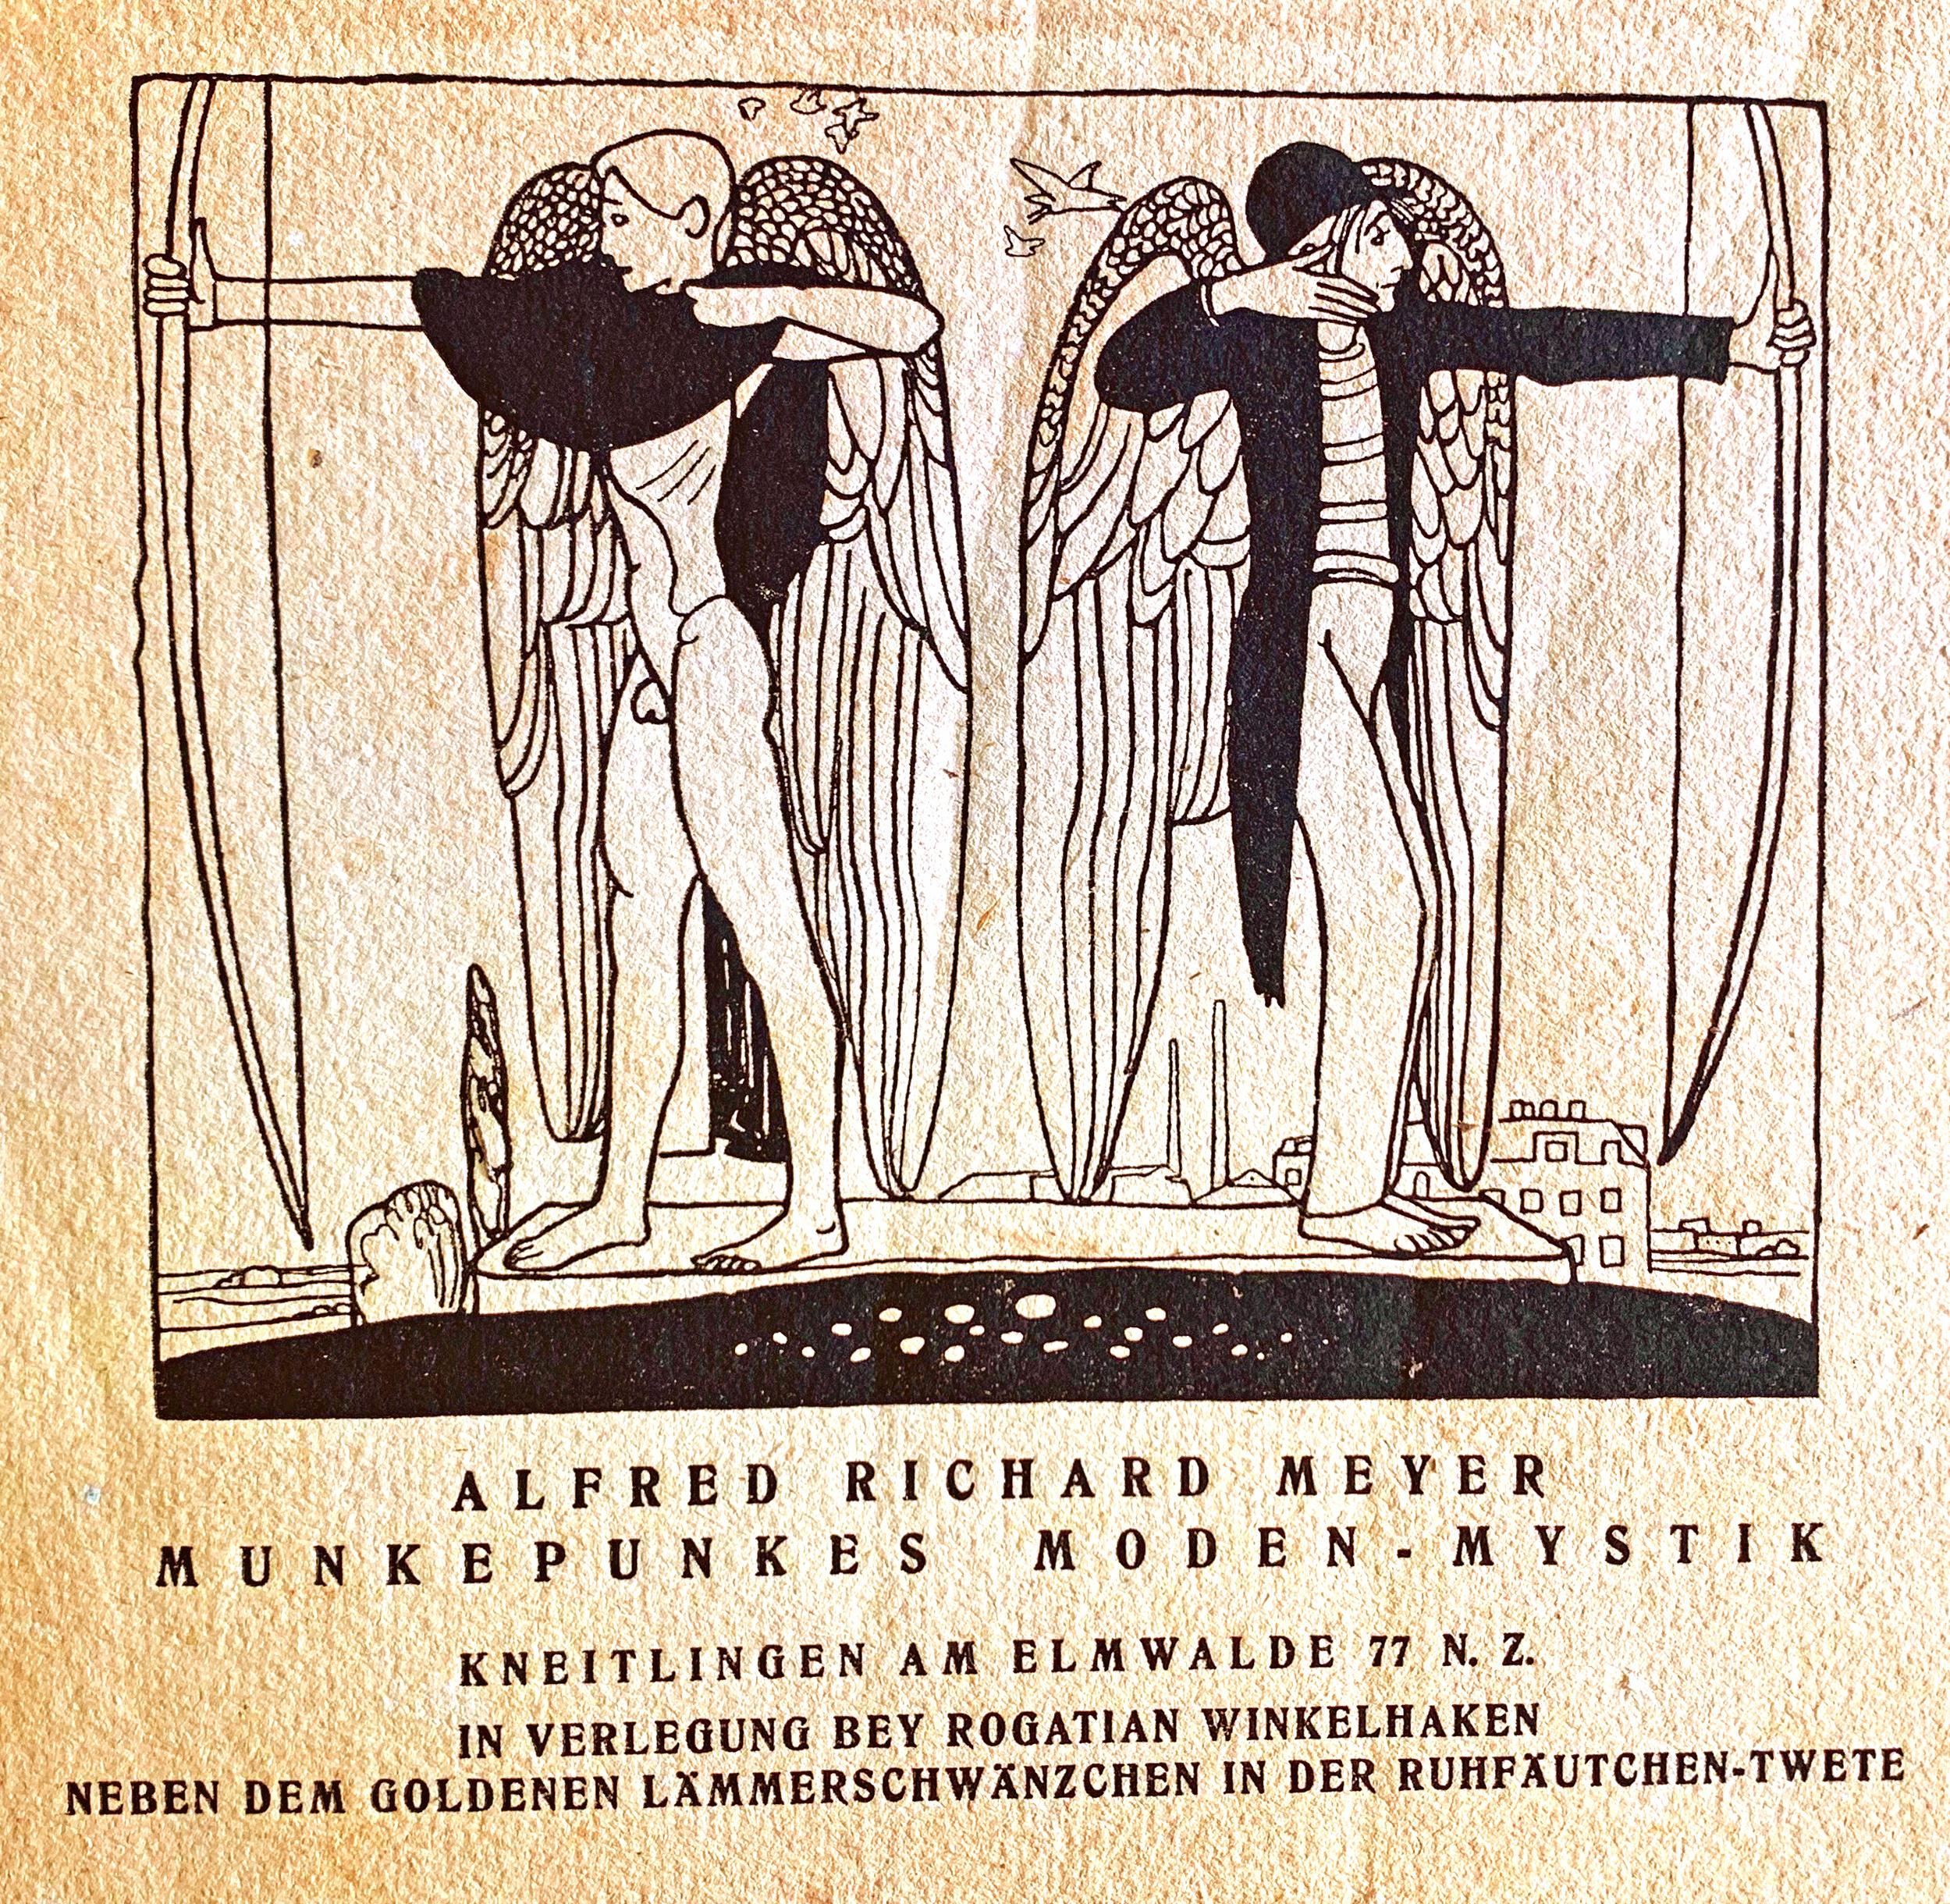 Rare and beautifully produced, this small booklet of poetry by Alfred Richard Meyer was published in 1921 with a stylized cover illustration by Richard Scheibe depicting two archers with angel wings, standing back to back, one nude and the other